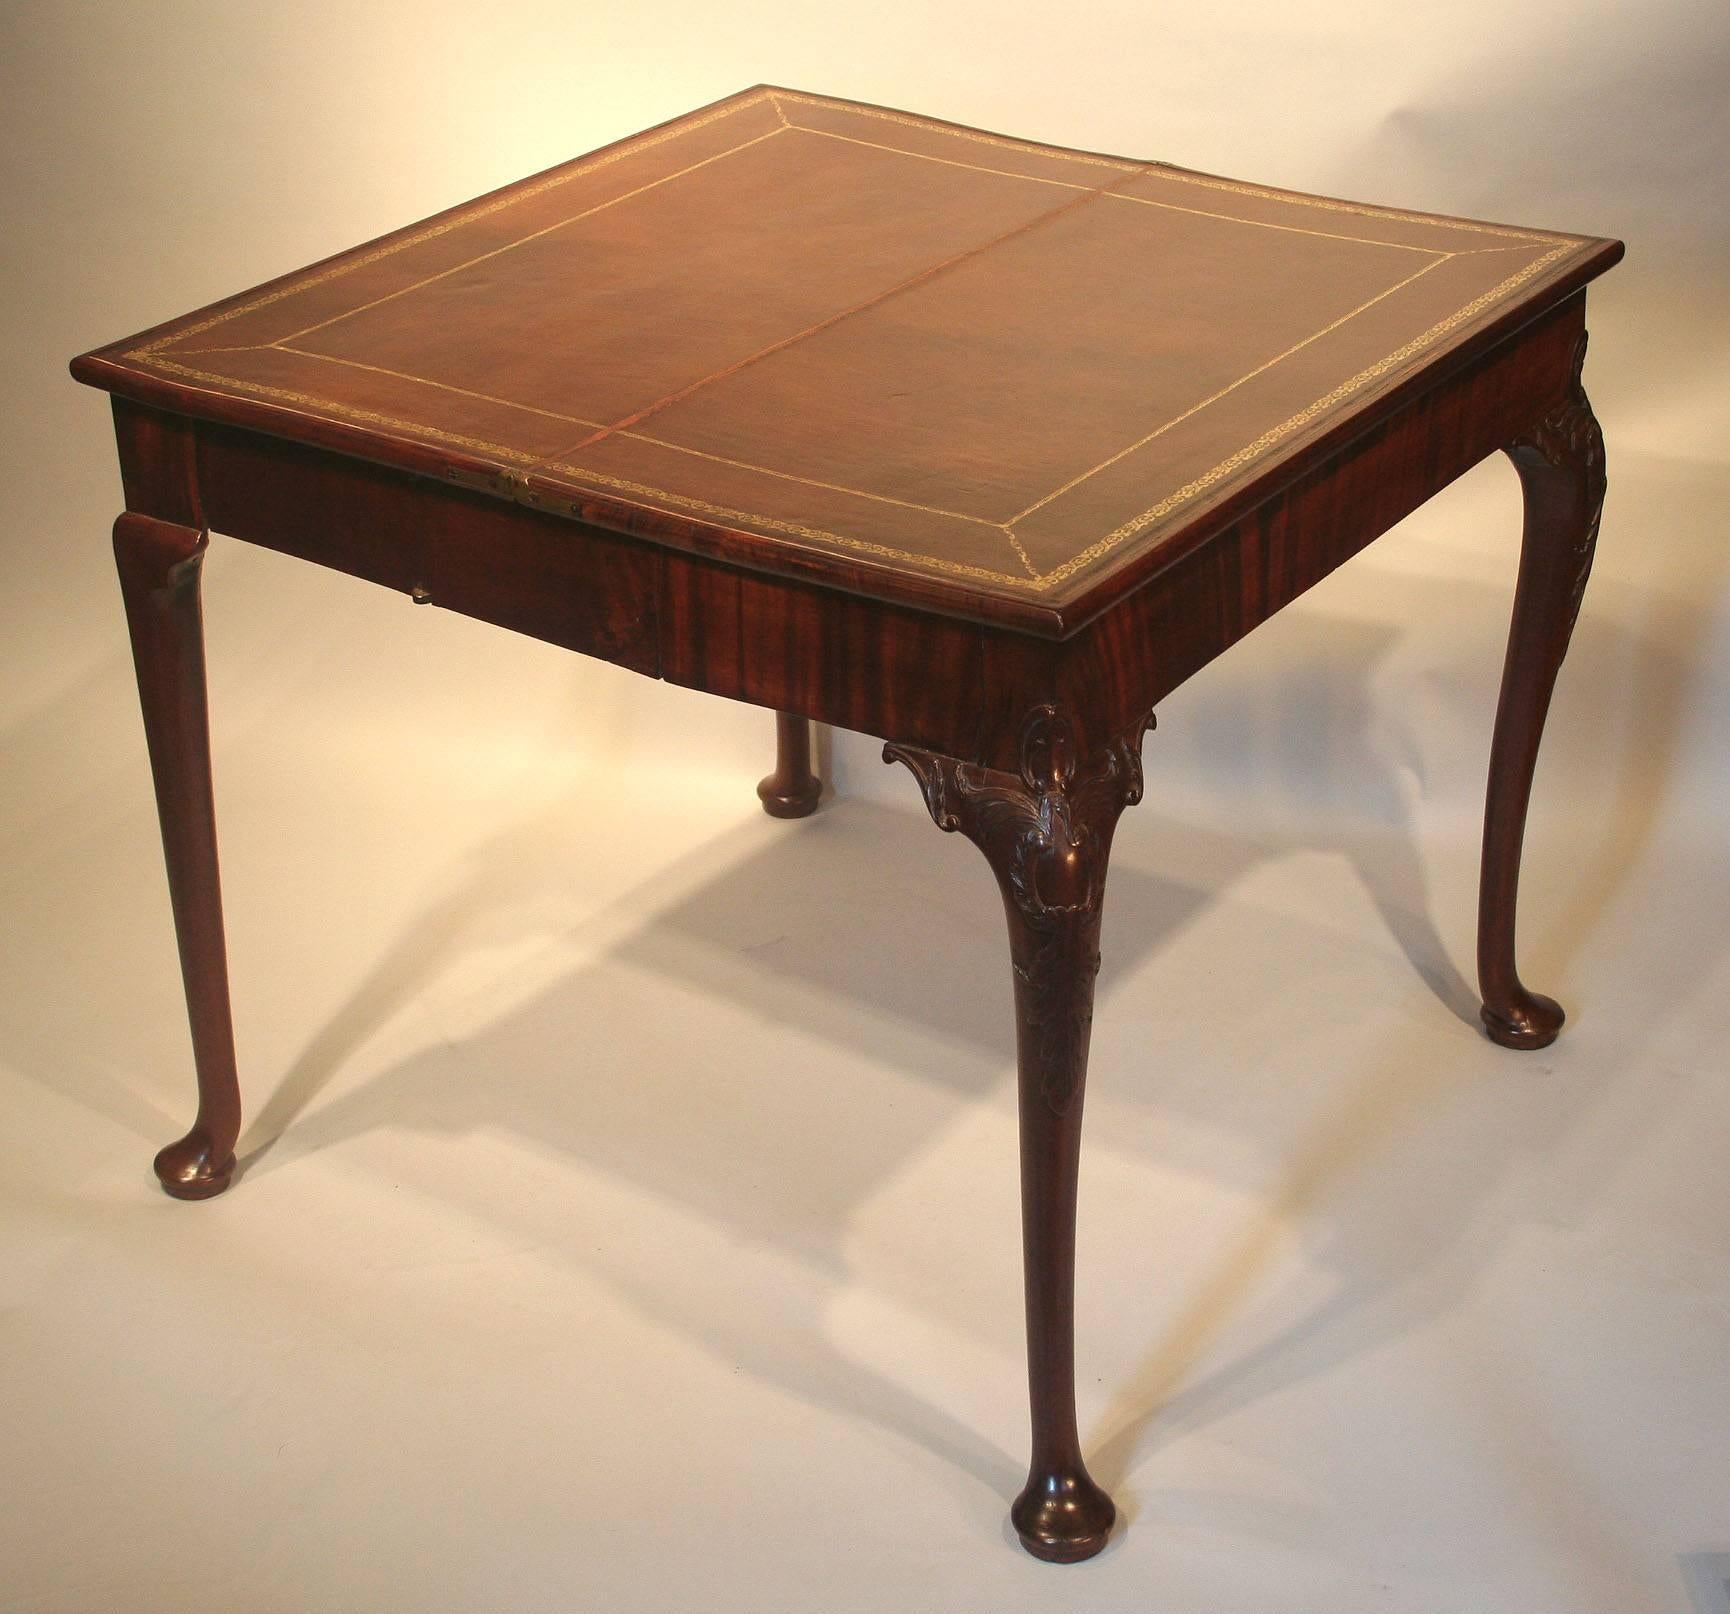 George II 18th Century English Card Table or Game Table For Sale